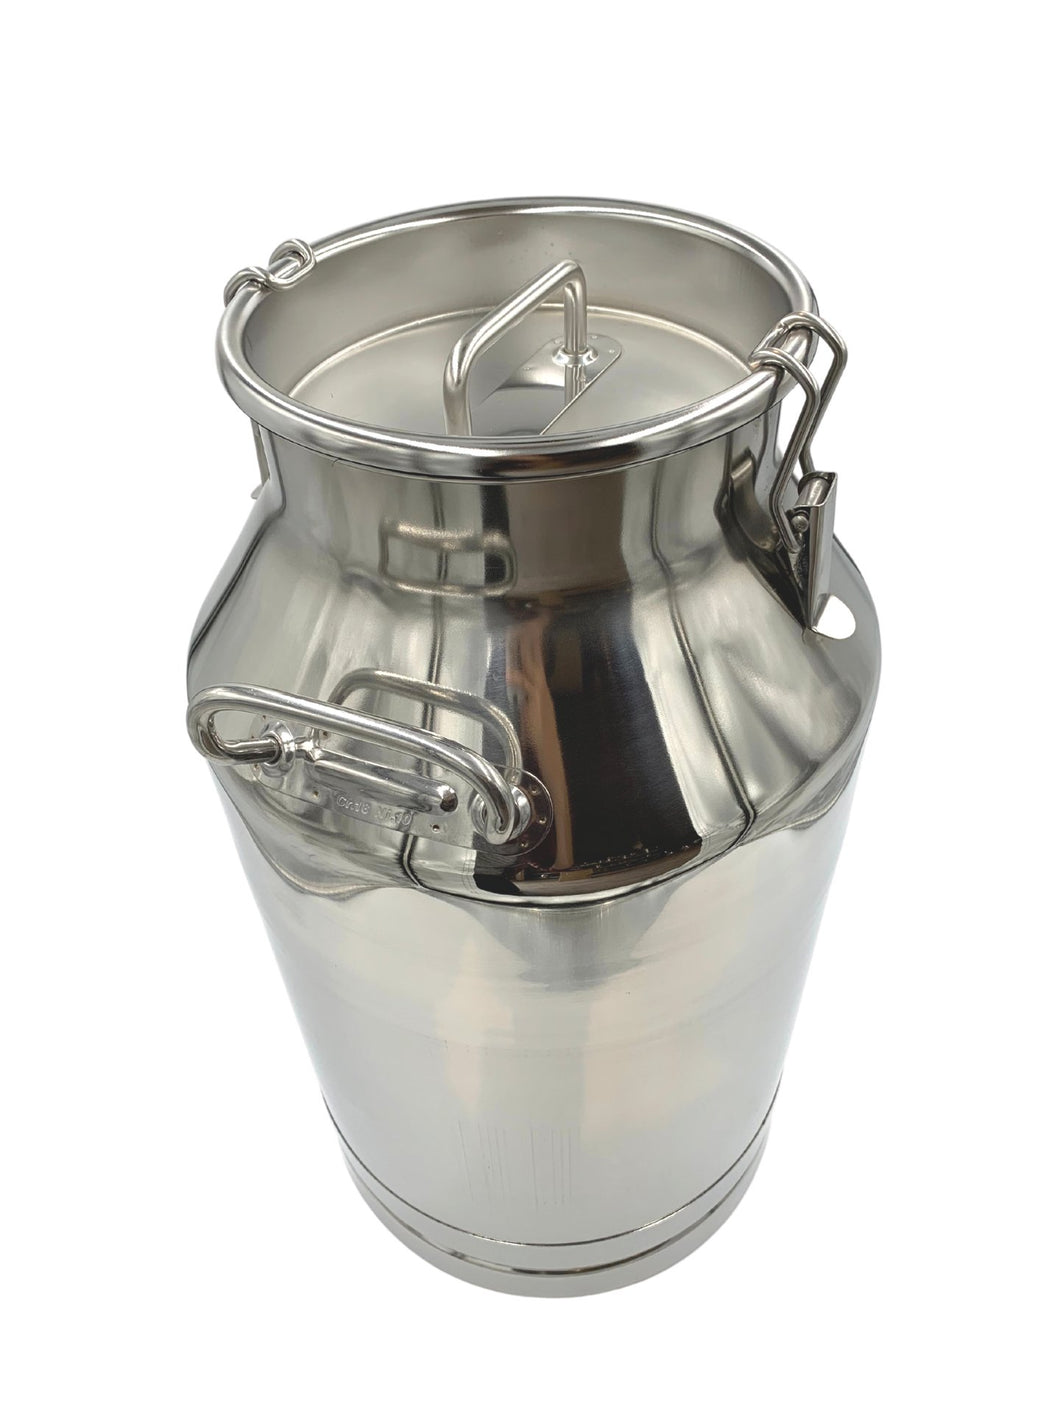 Large Stainless Steel Milk Tote Cans – Shenandoah Homestead Supply